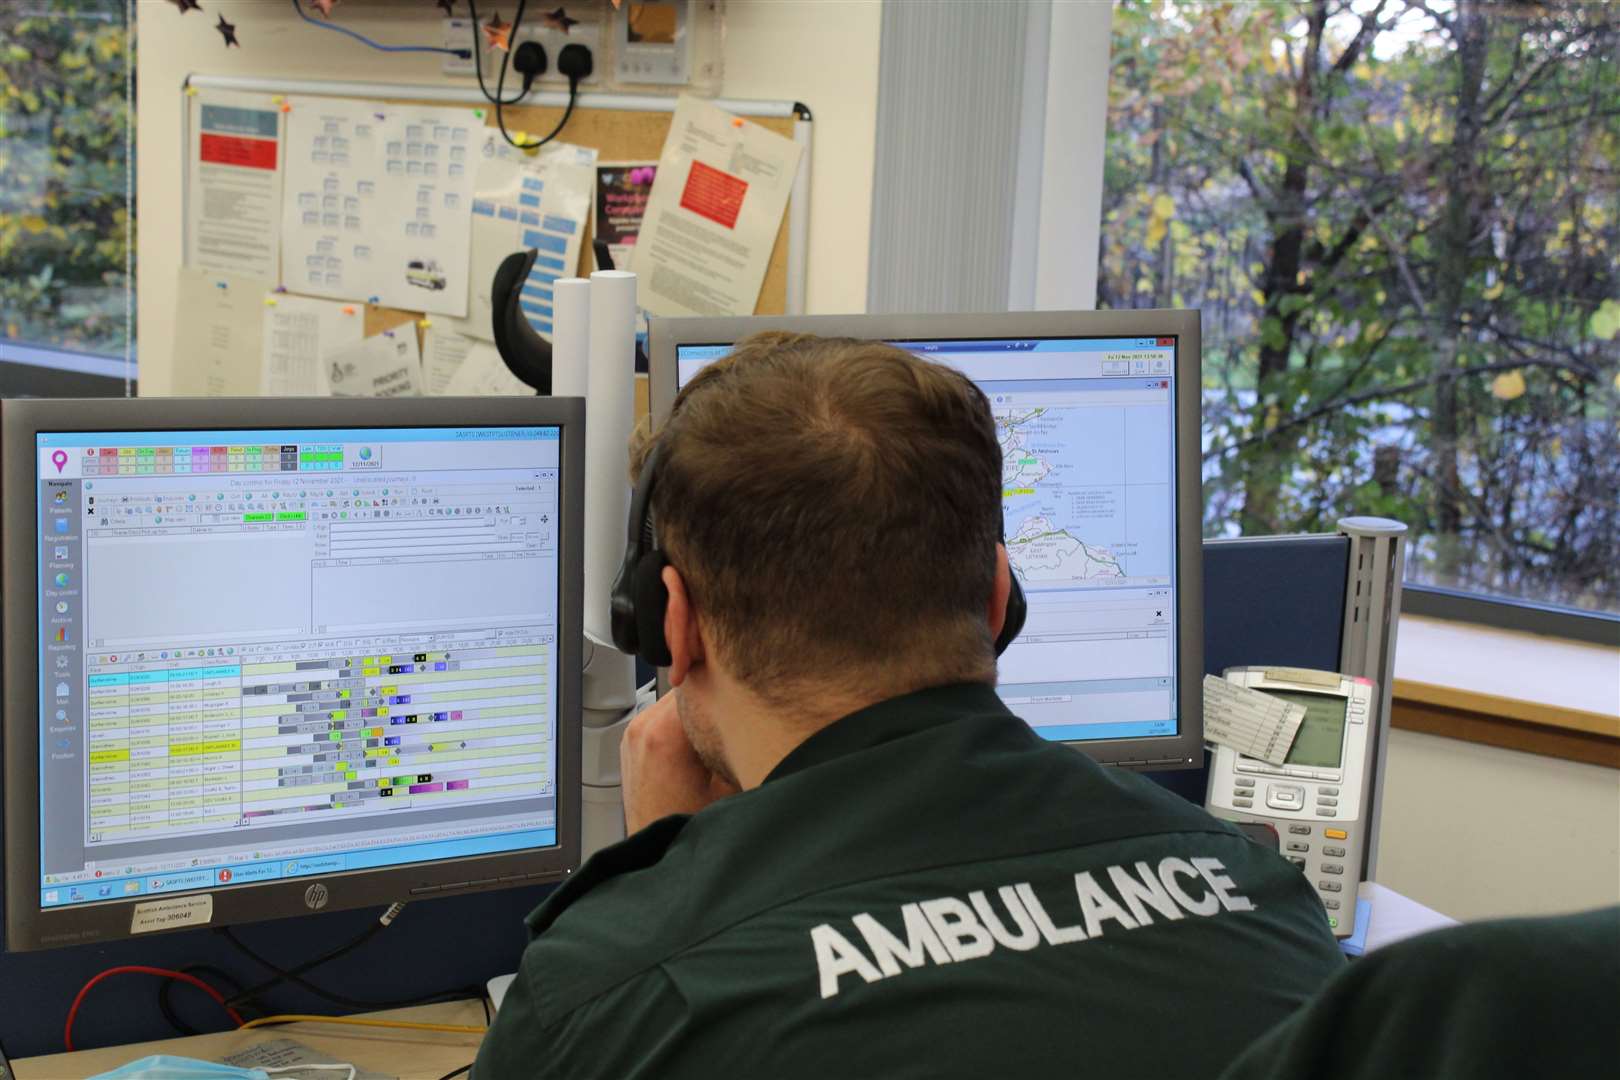 The Scottish Ambulance Service had reported a steep rise in fake 999 calls.